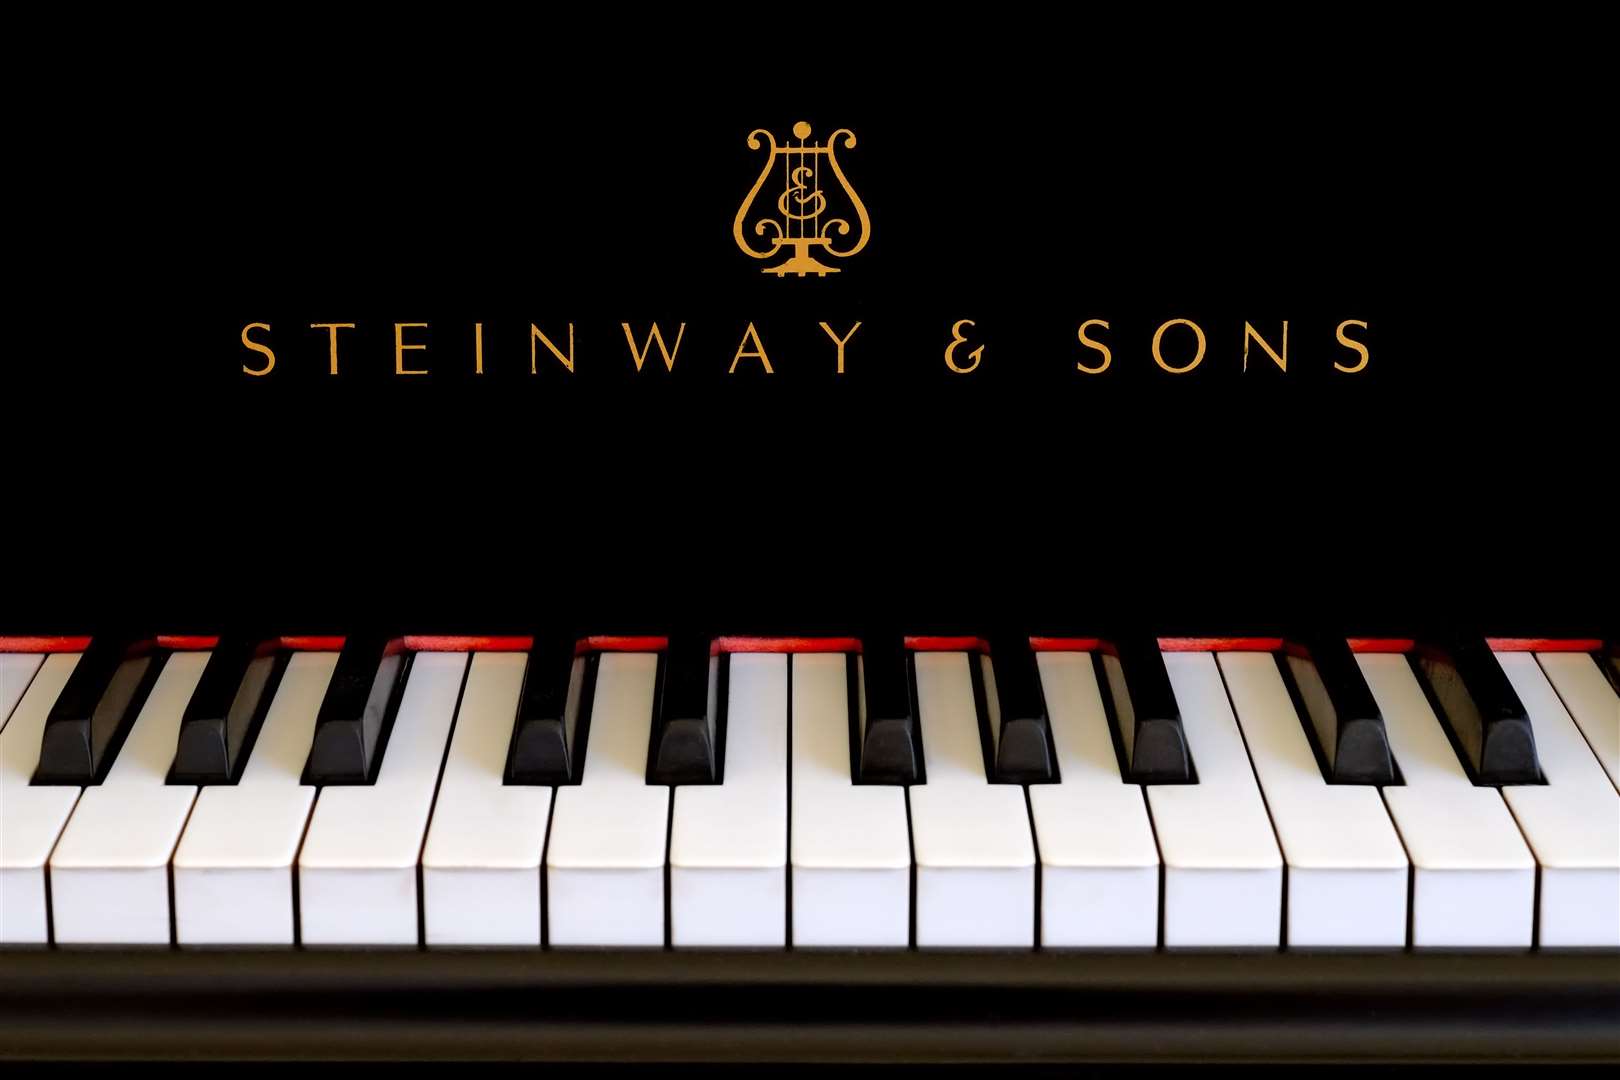 Steinway & Sons is the legendary piano maker.